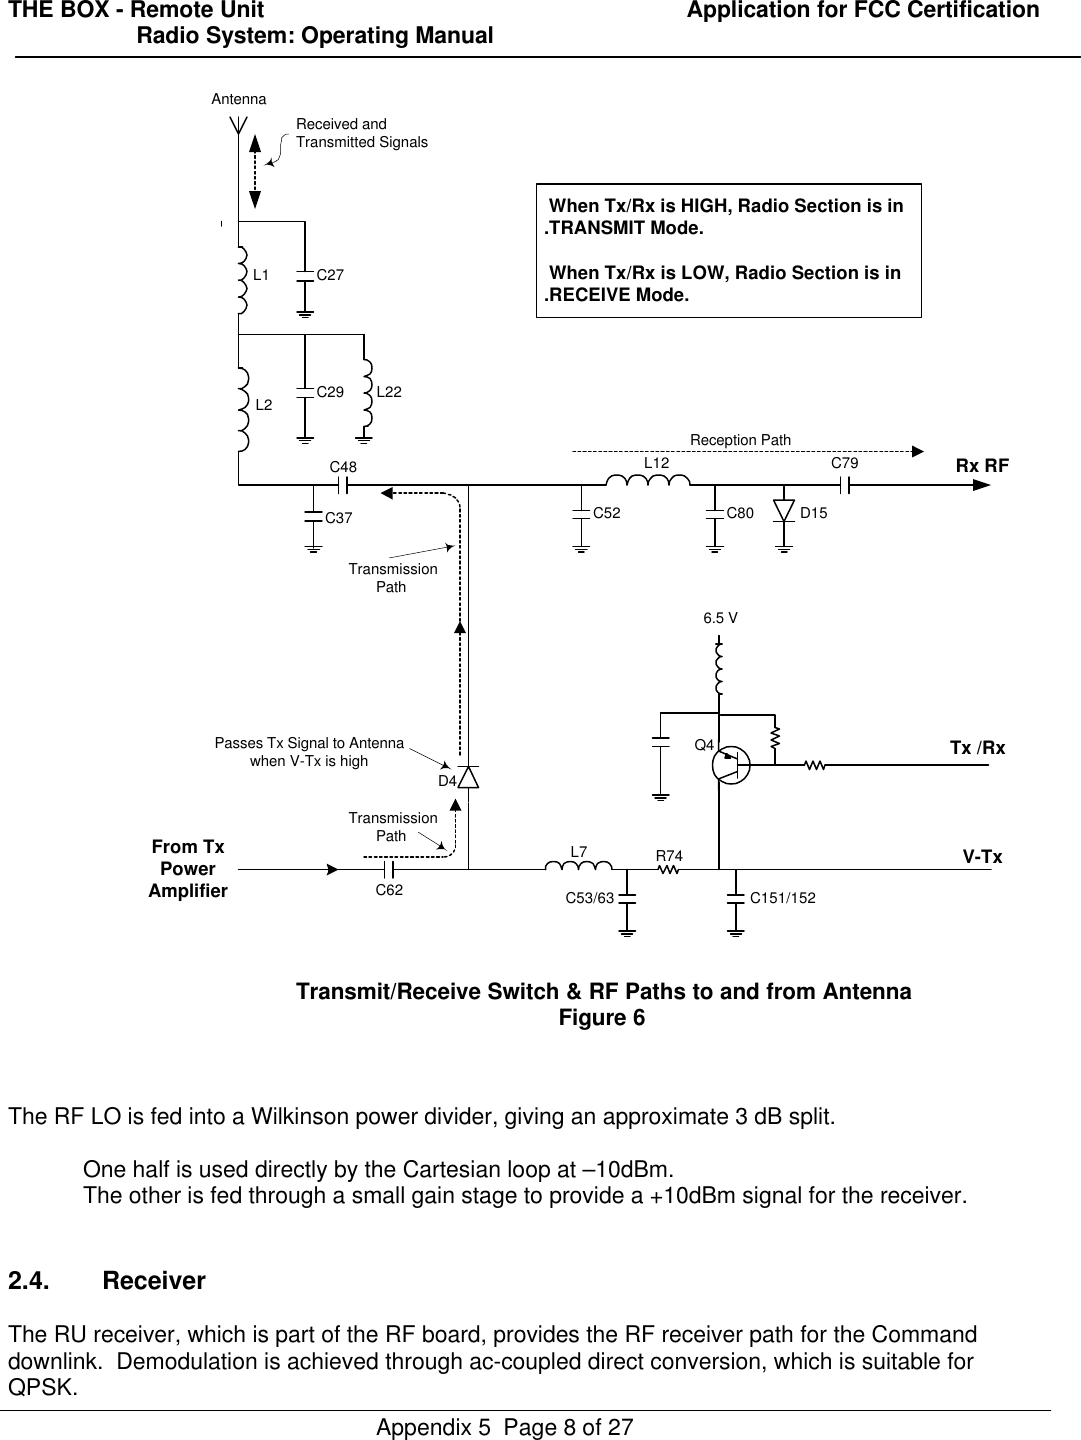 THE BOX - Remote Unit                                                                  Application for FCC Certification                    Radio System: Operating ManualAppendix 5  Page 8 of 27The RF LO is fed into a Wilkinson power divider, giving an approximate 3 dB split.One half is used directly by the Cartesian loop at –10dBm.The other is fed through a small gain stage to provide a +10dBm signal for the receiver.2.4. ReceiverThe RU receiver, which is part of the RF board, provides the RF receiver path for the Commanddownlink.  Demodulation is achieved through ac-coupled direct conversion, which is suitable forQPSK.V-TxD4L7 R74C53/63 C151/152Q4 Tx /RxFrom TxPowerAmplifier C62Passes Tx Signal to Antennawhen V-Tx is highTransmissionPathTransmissionPathRx RFL2L12C48C27C29 L22C37 C52 C80 D15C79AntennaReceived andTransmitted SignalsReception PathL1 When Tx/Rx is HIGH, Radio Section is in.TRANSMIT Mode. When Tx/Rx is LOW, Radio Section is in.RECEIVE Mode.Transmit/Receive Switch &amp; RF Paths to and from AntennaFigure 66.5 V